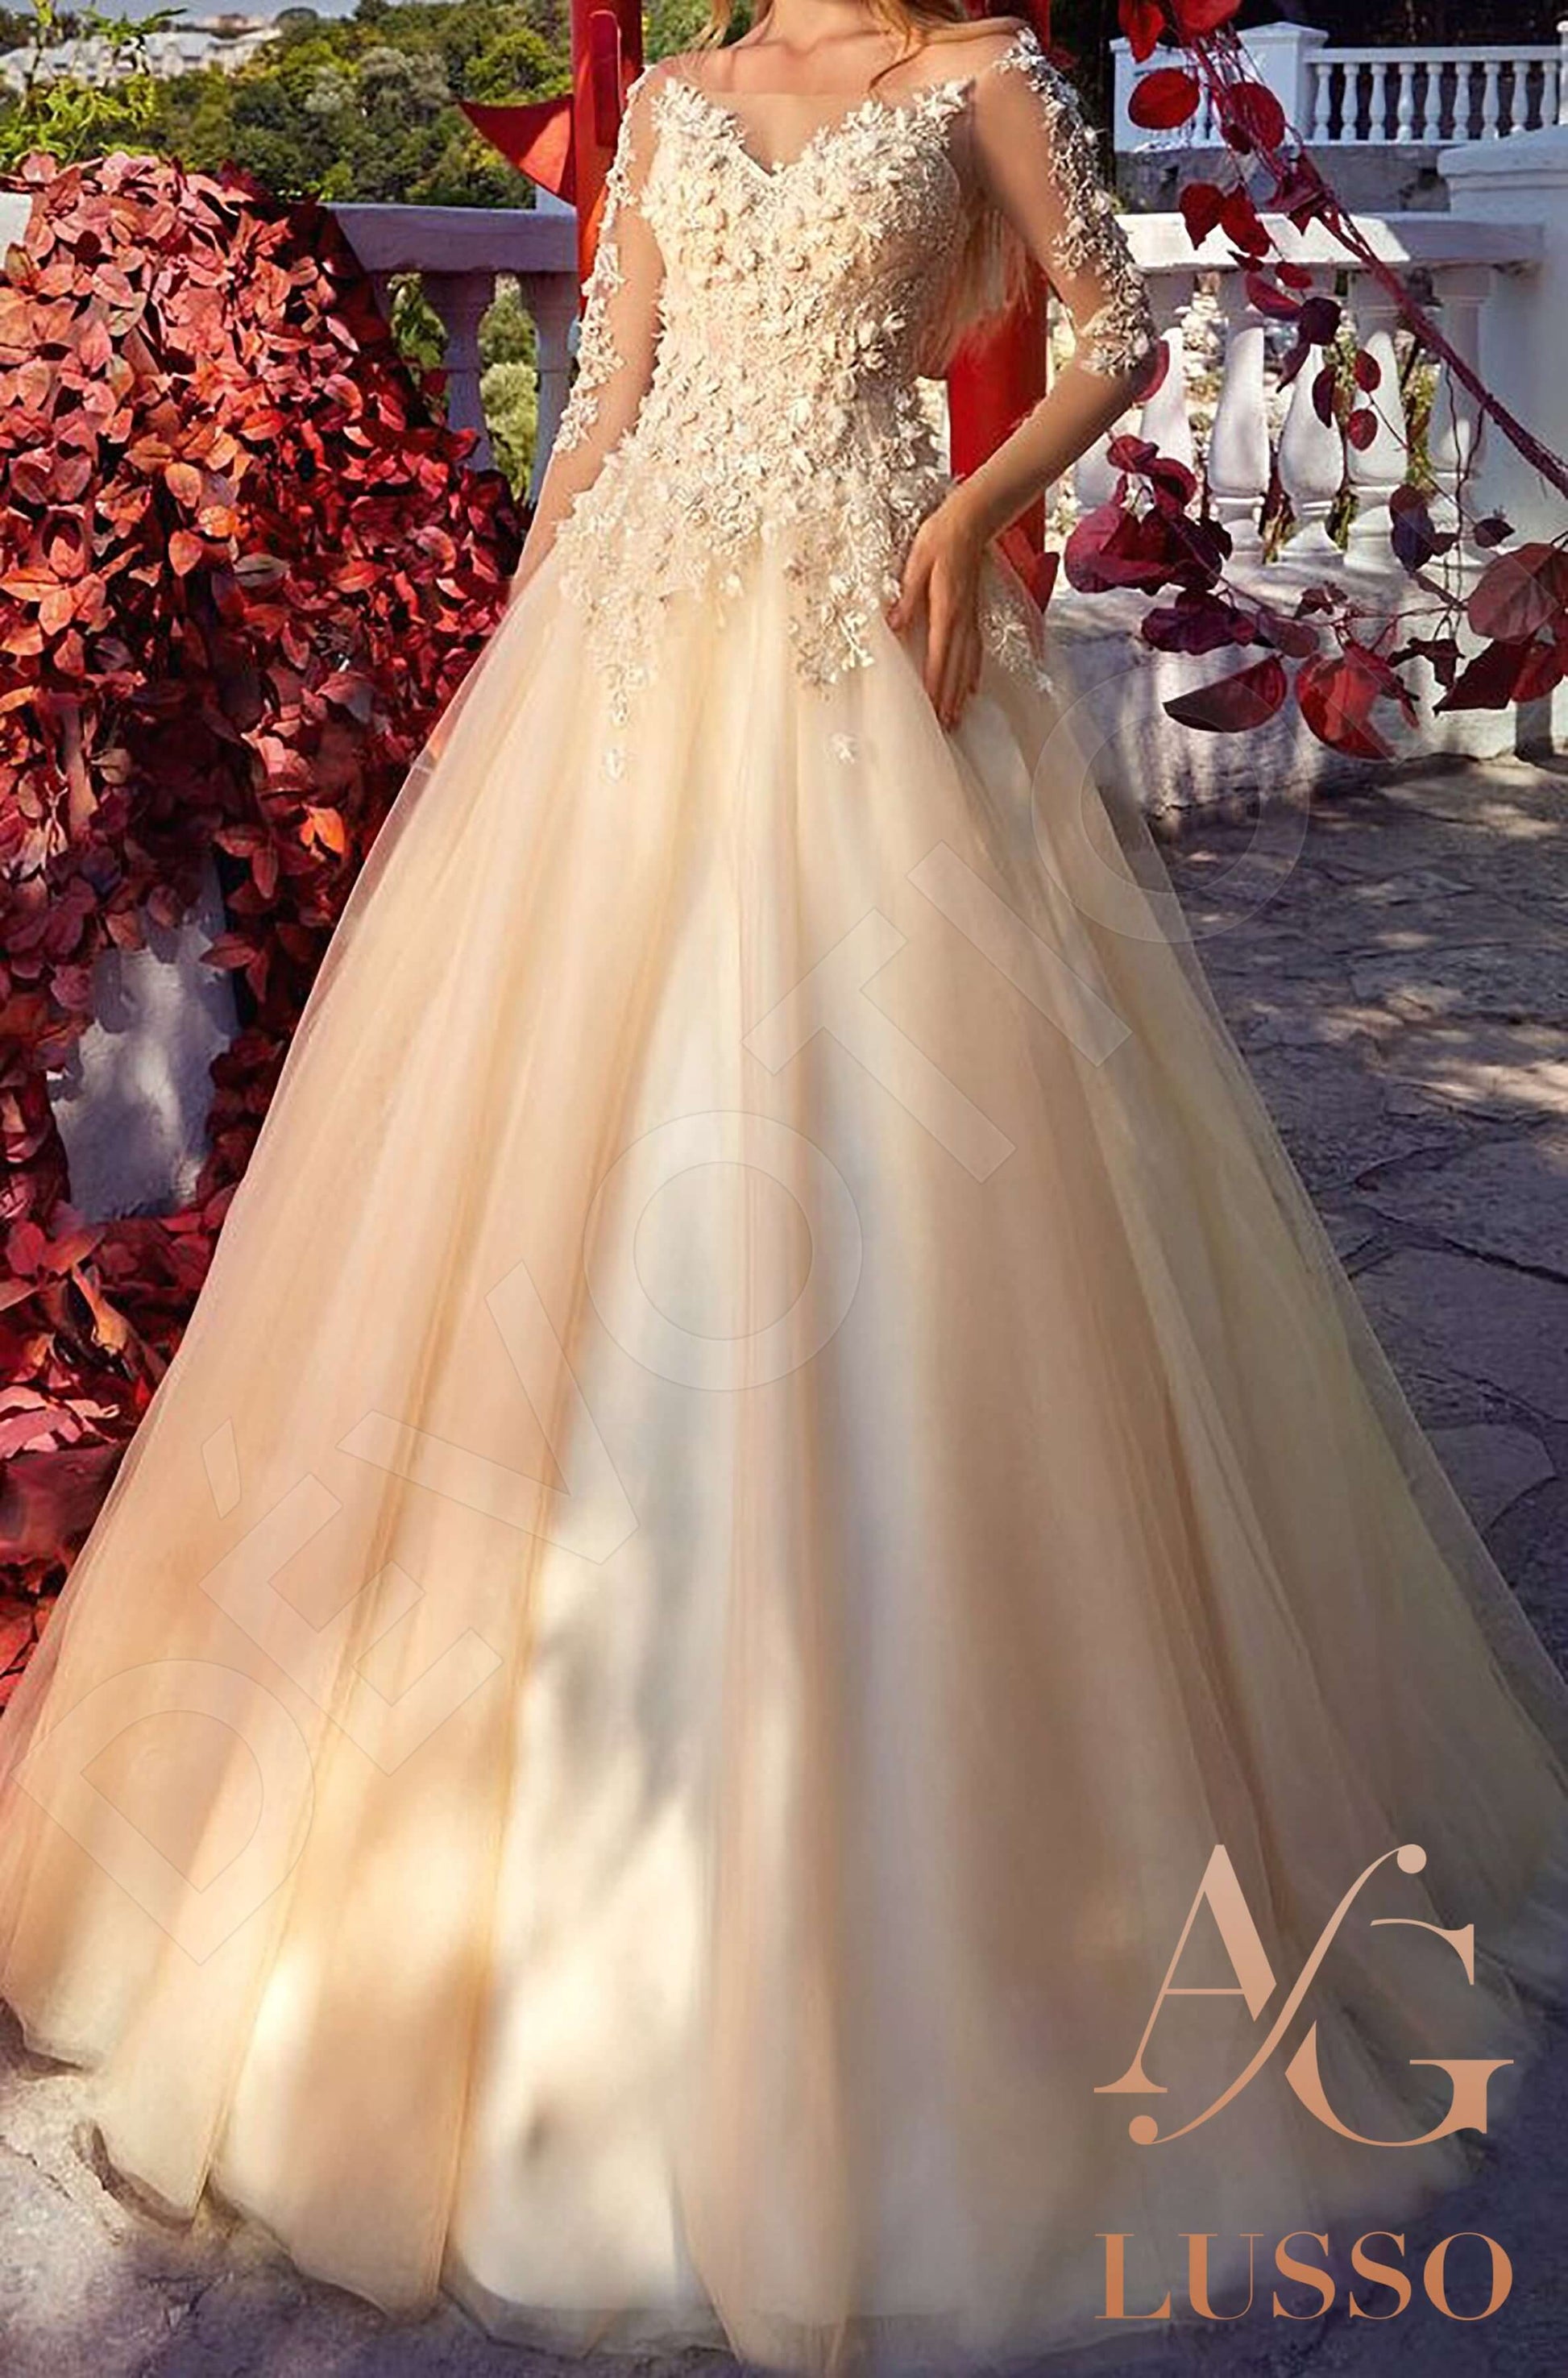 Kaily Princess/Ball Gown Off-shoulder/Drop shoulders Nude Wedding dress